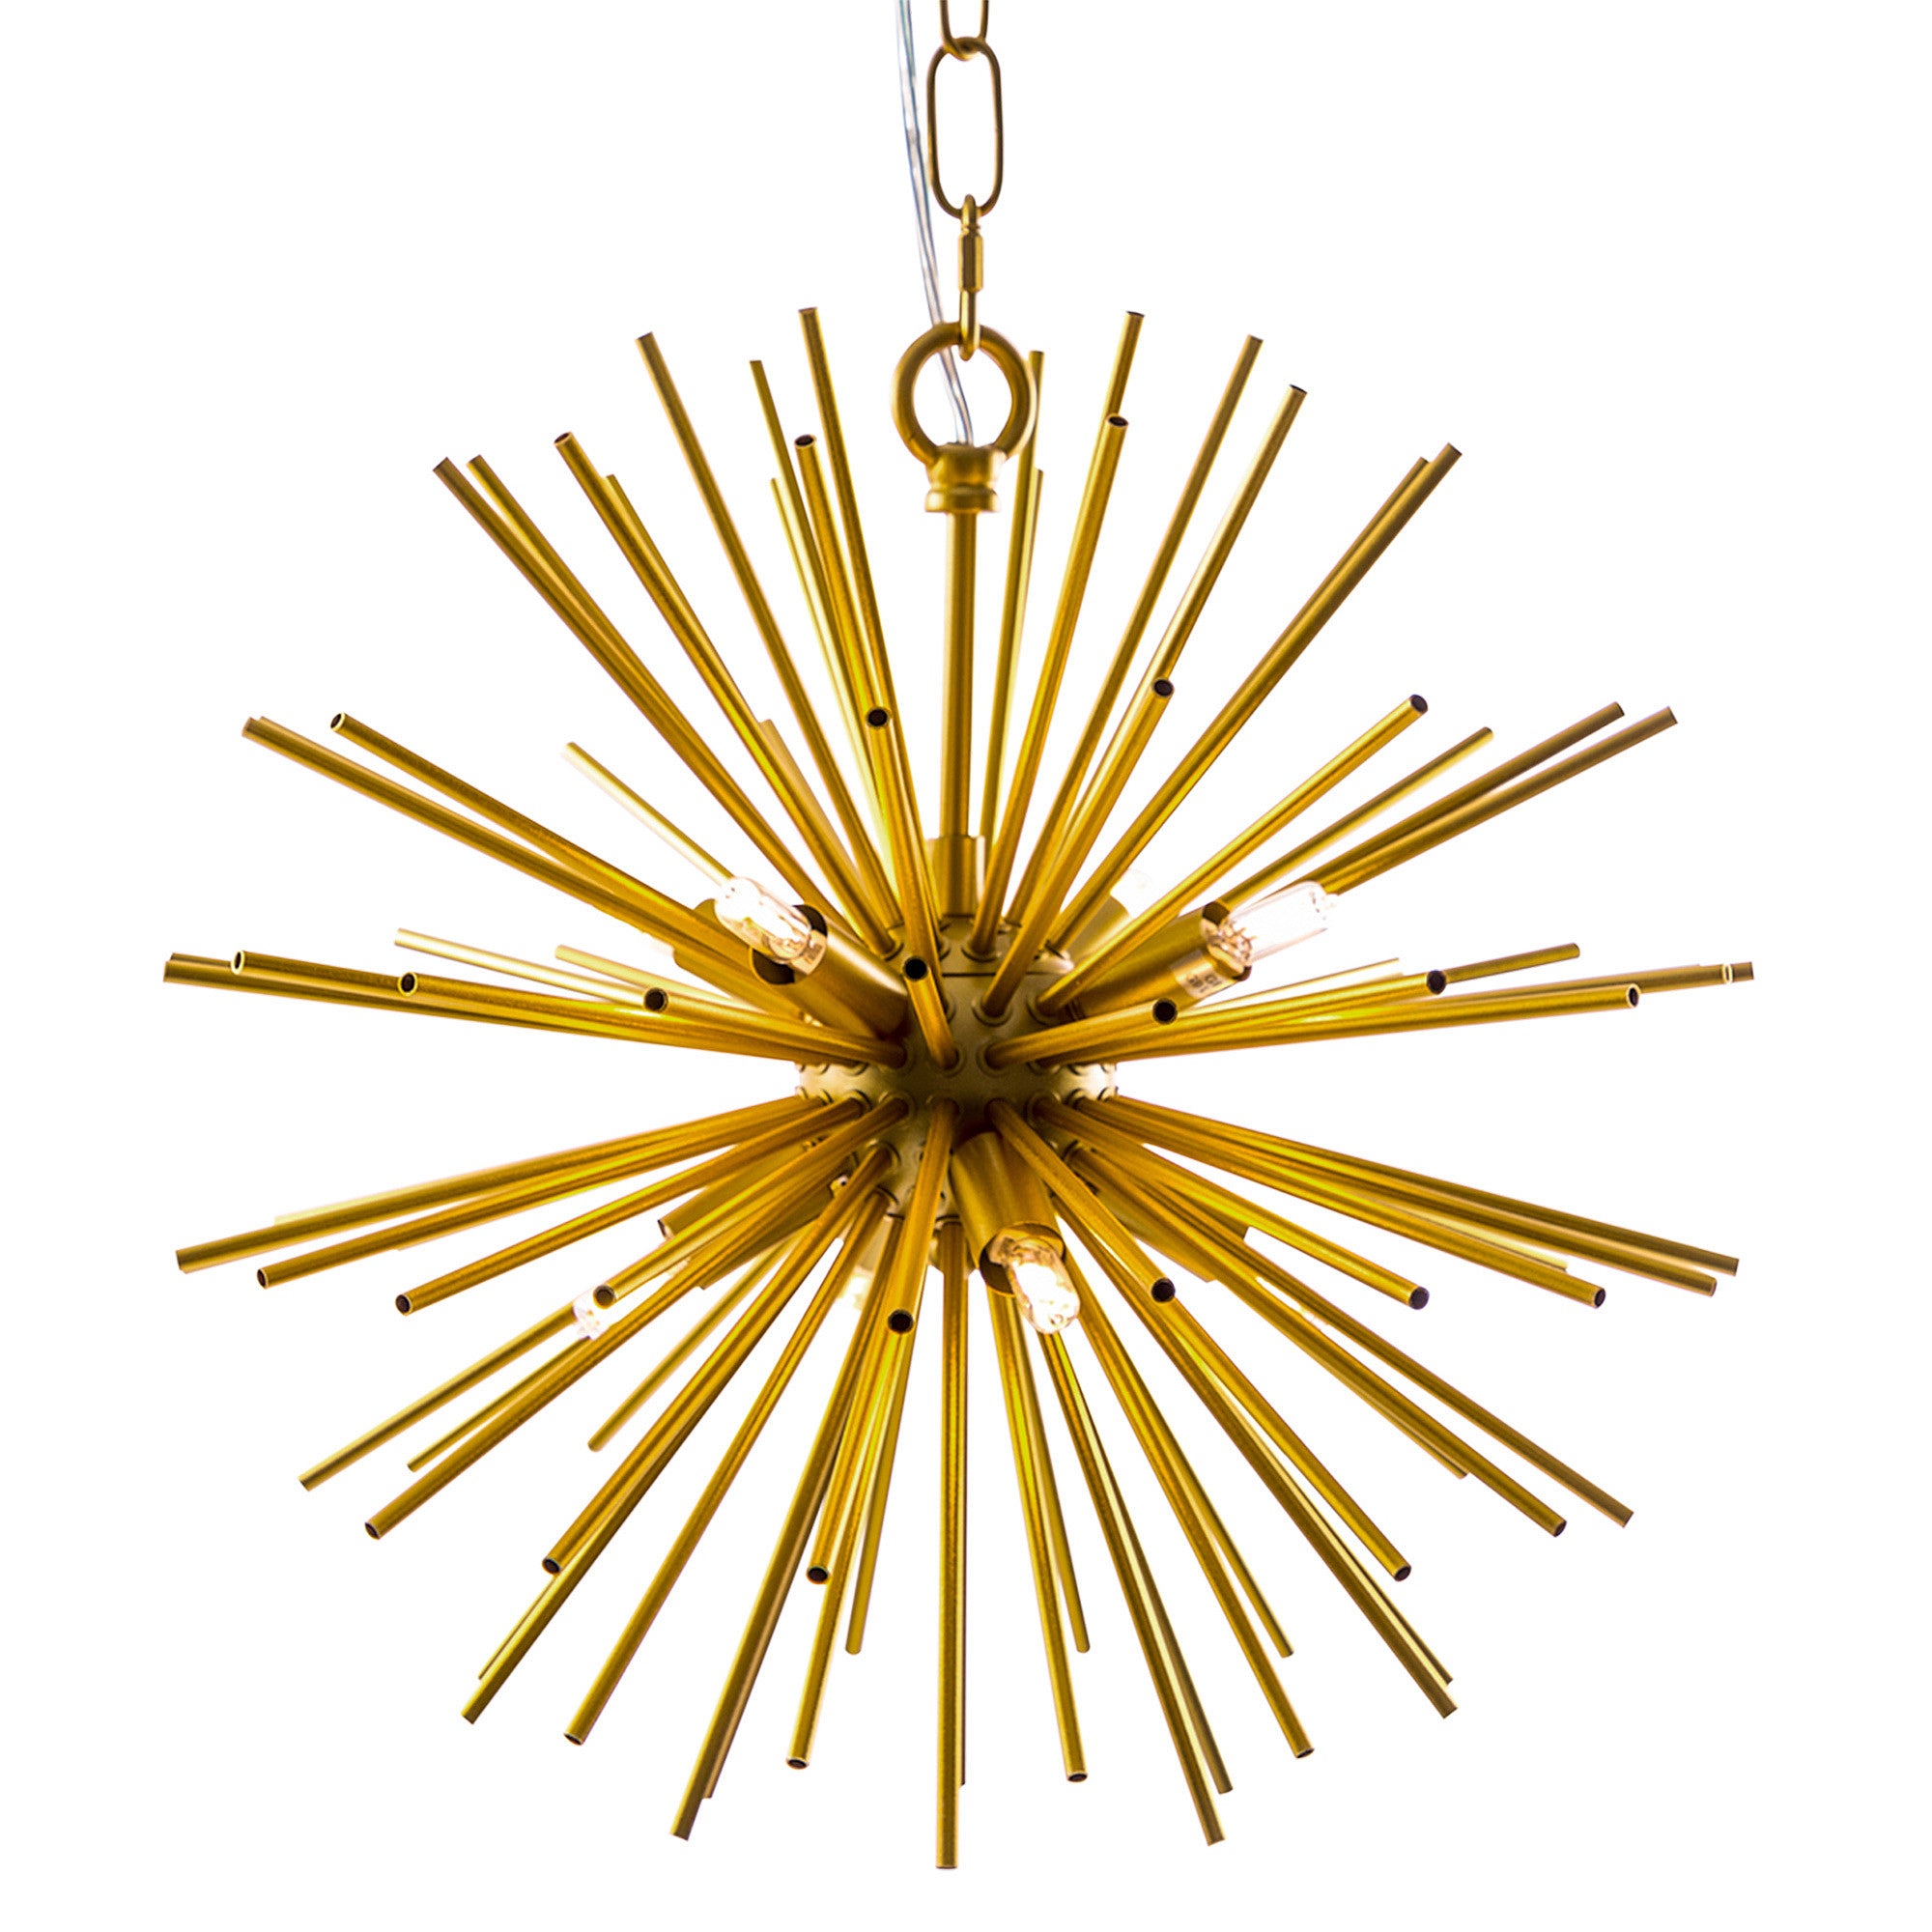 Aurora Small Gold Starburst Ceiling Light with 8 Lights